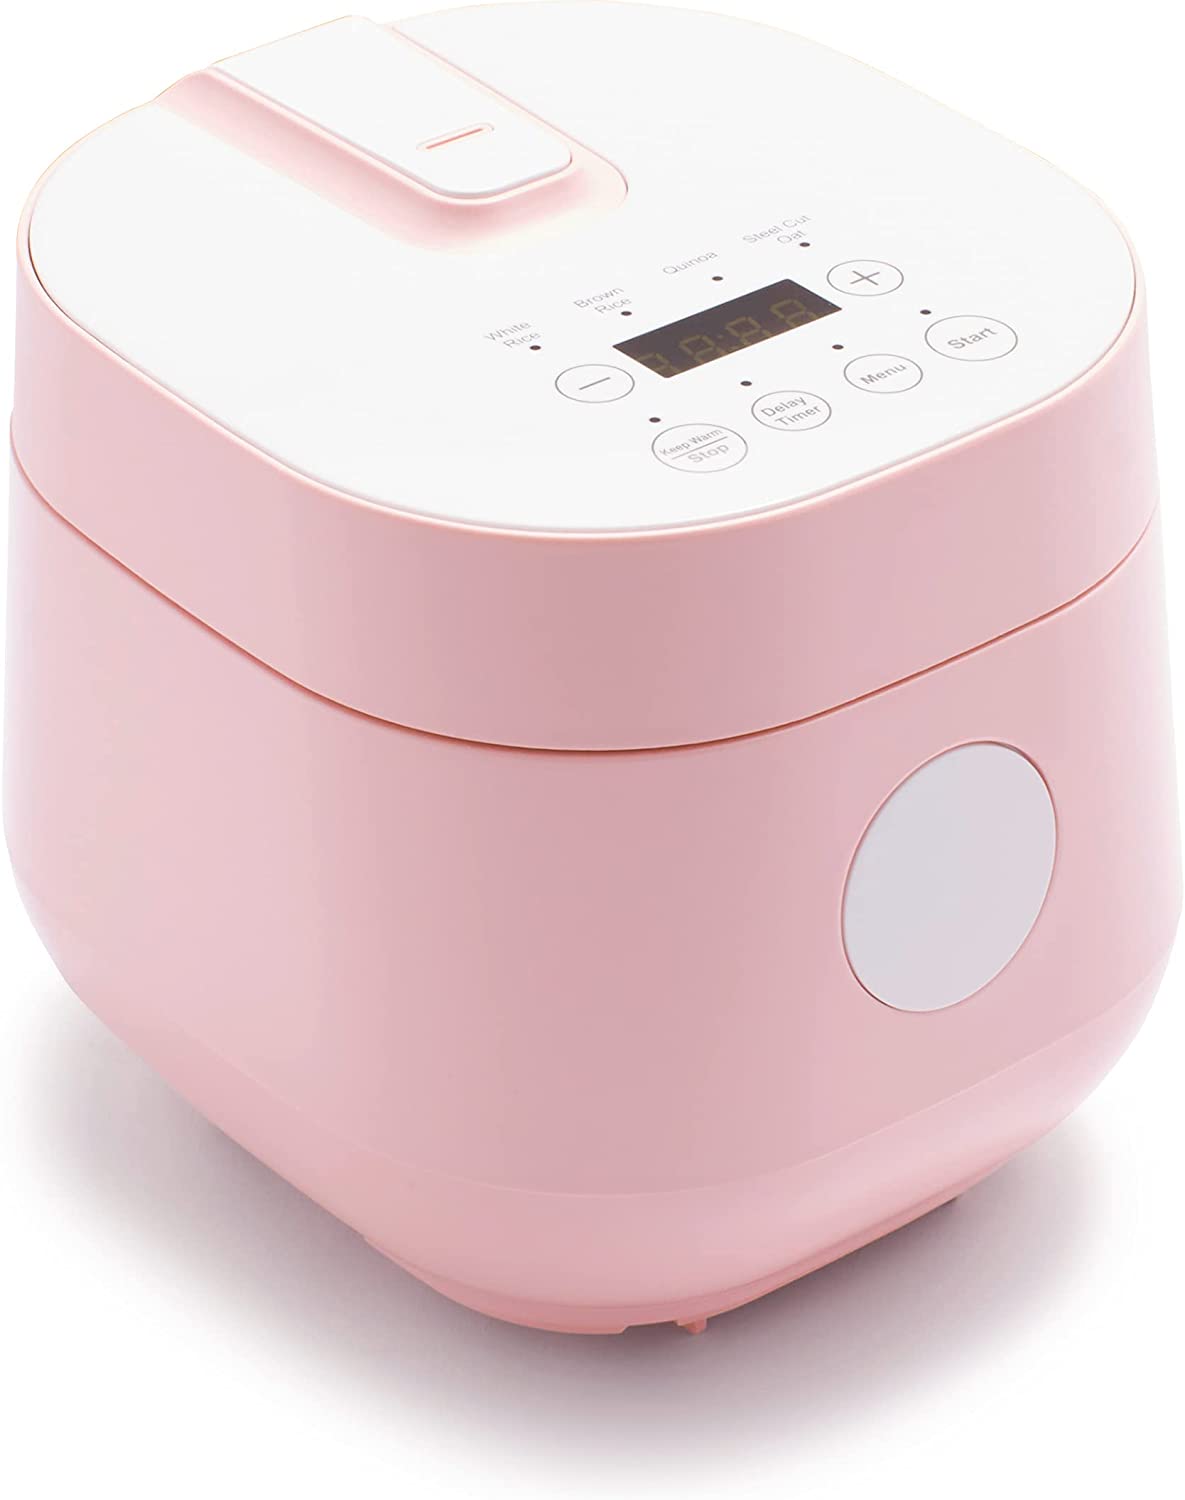 pink rice cooker